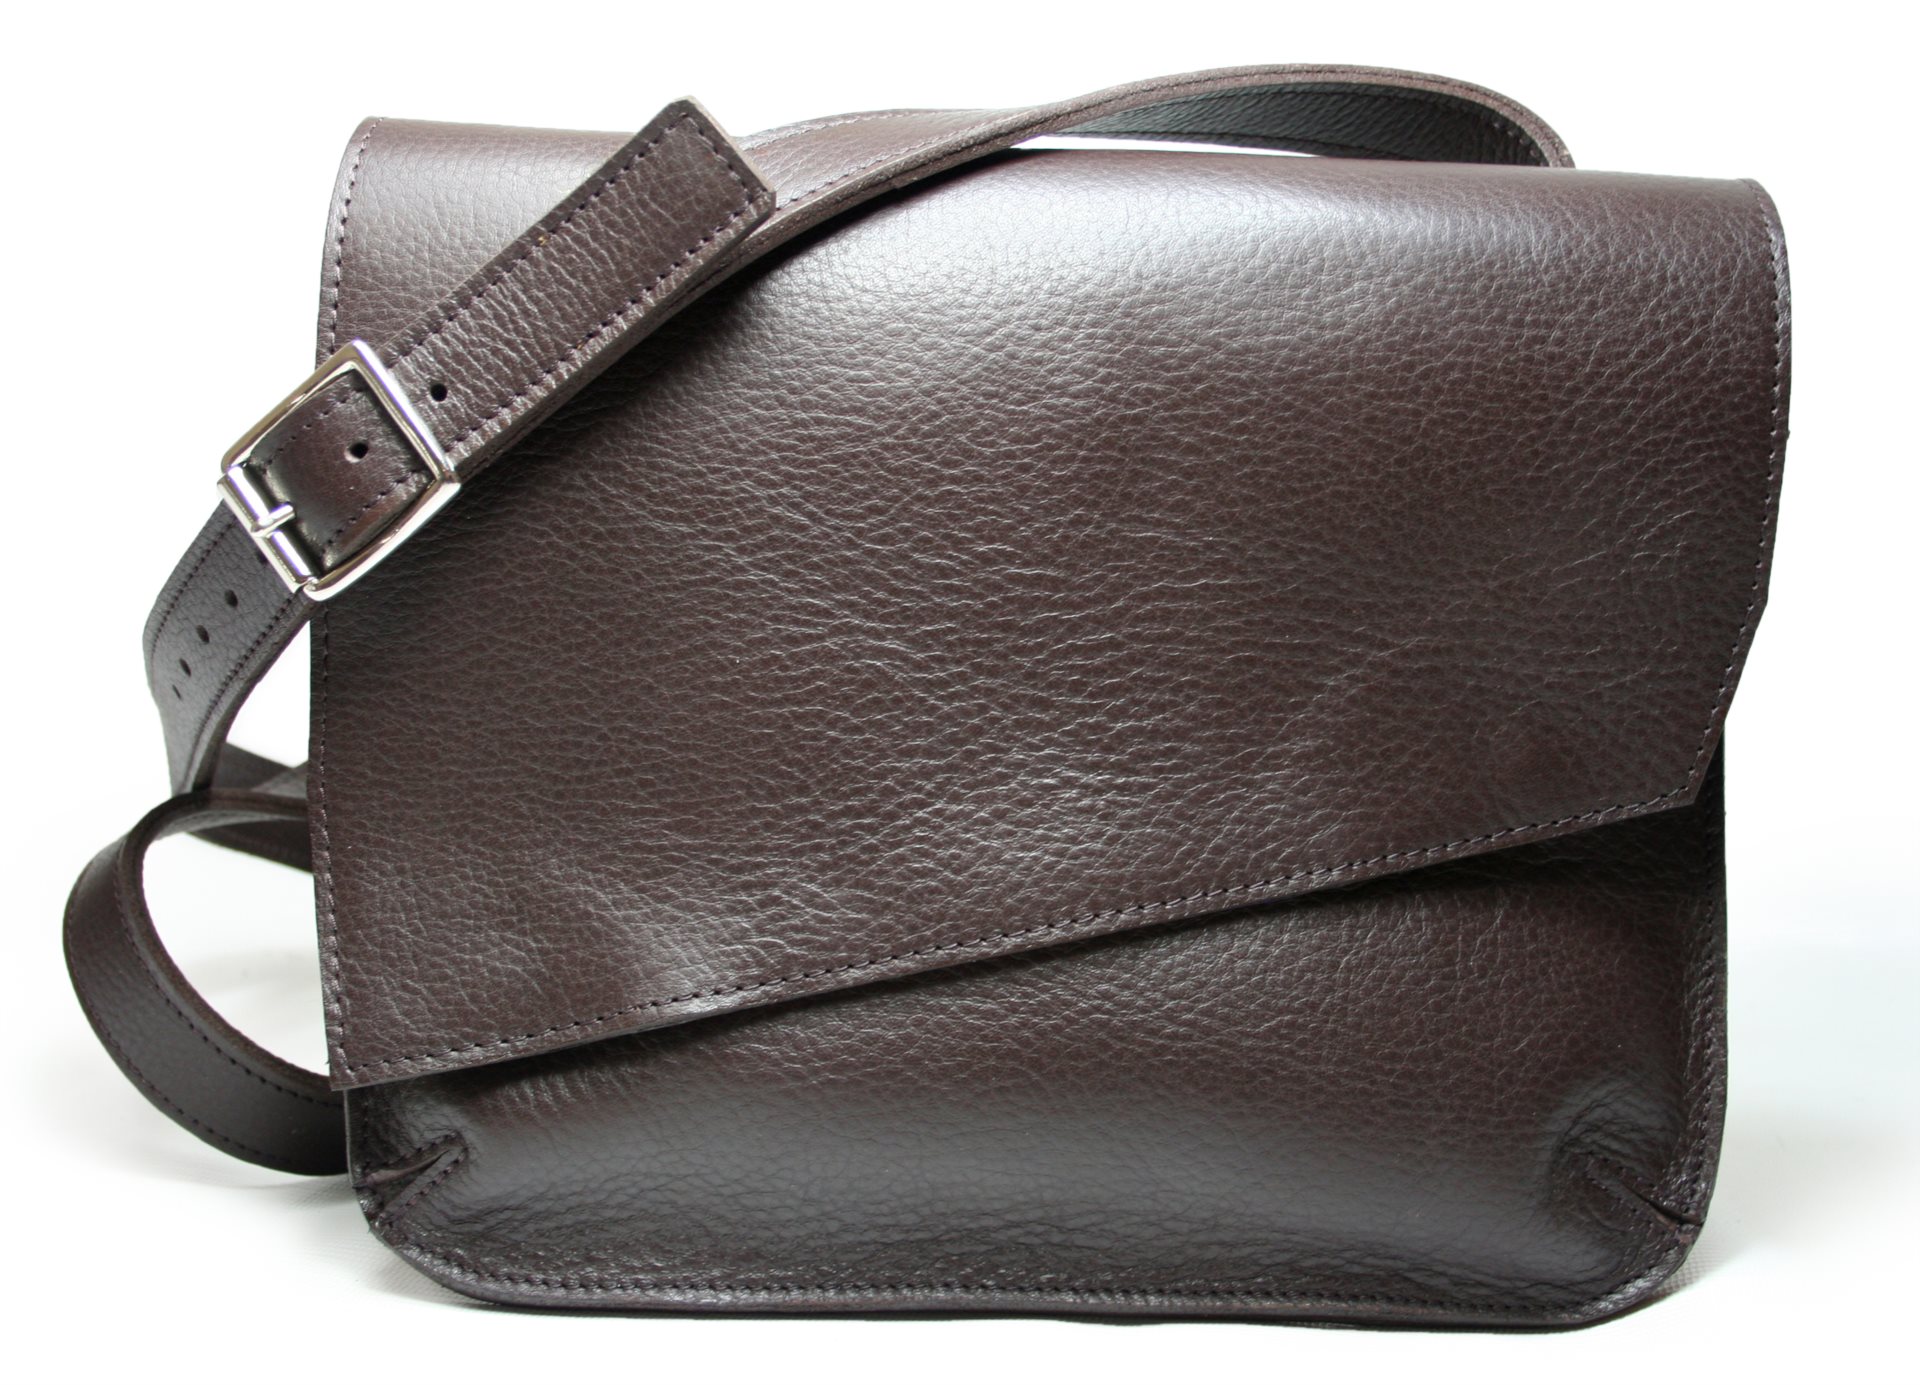 Whitton Bag with Magnetic Closure